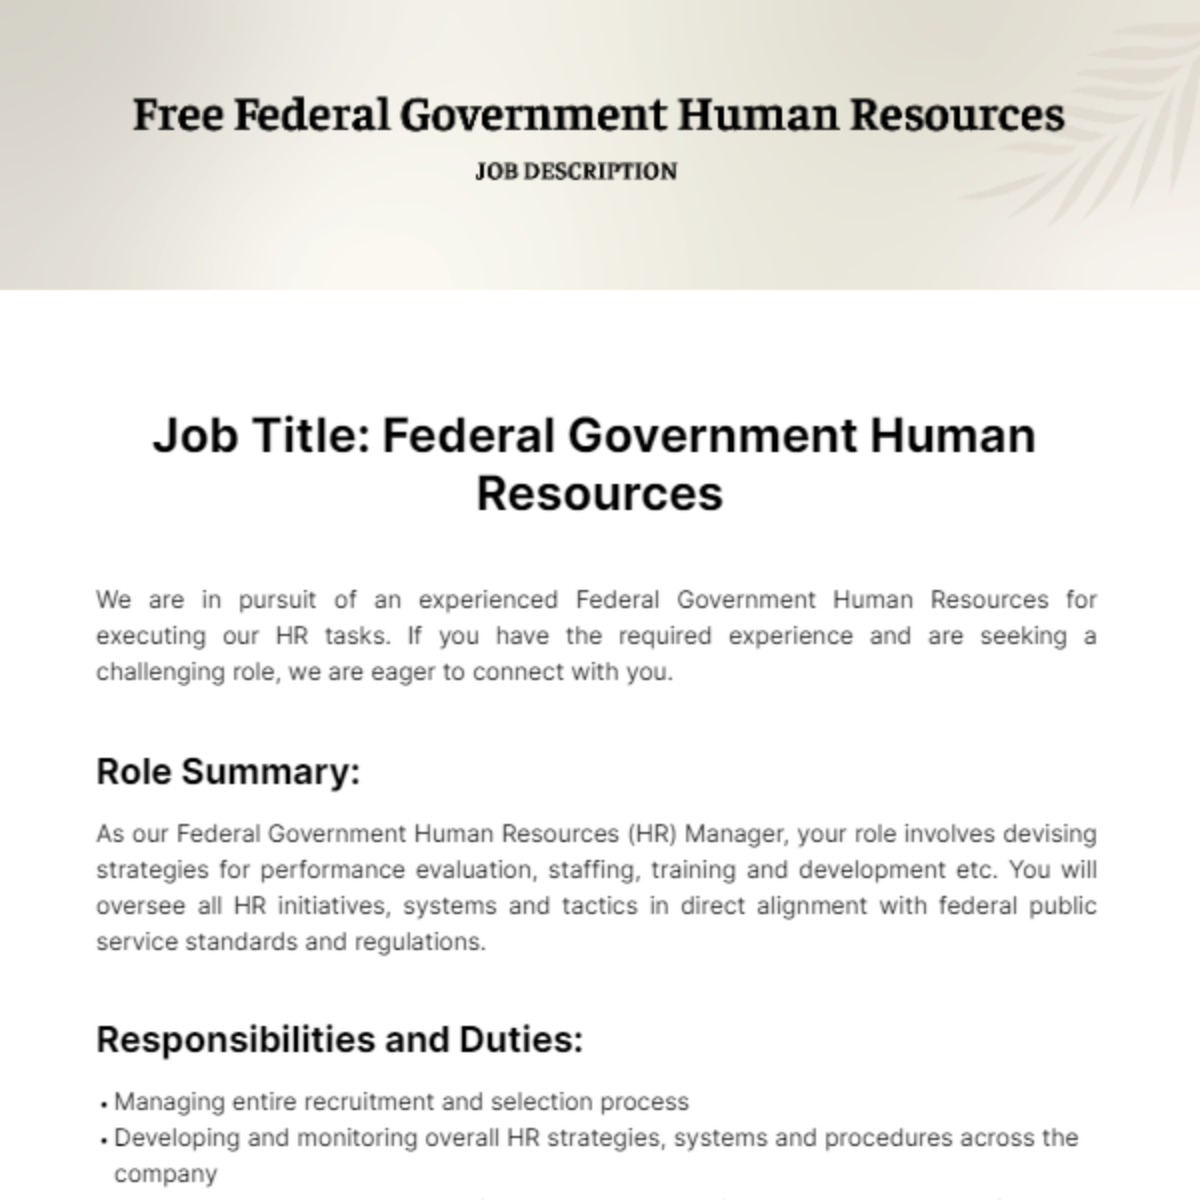 Free Federal Government Human Resources Job Description Template